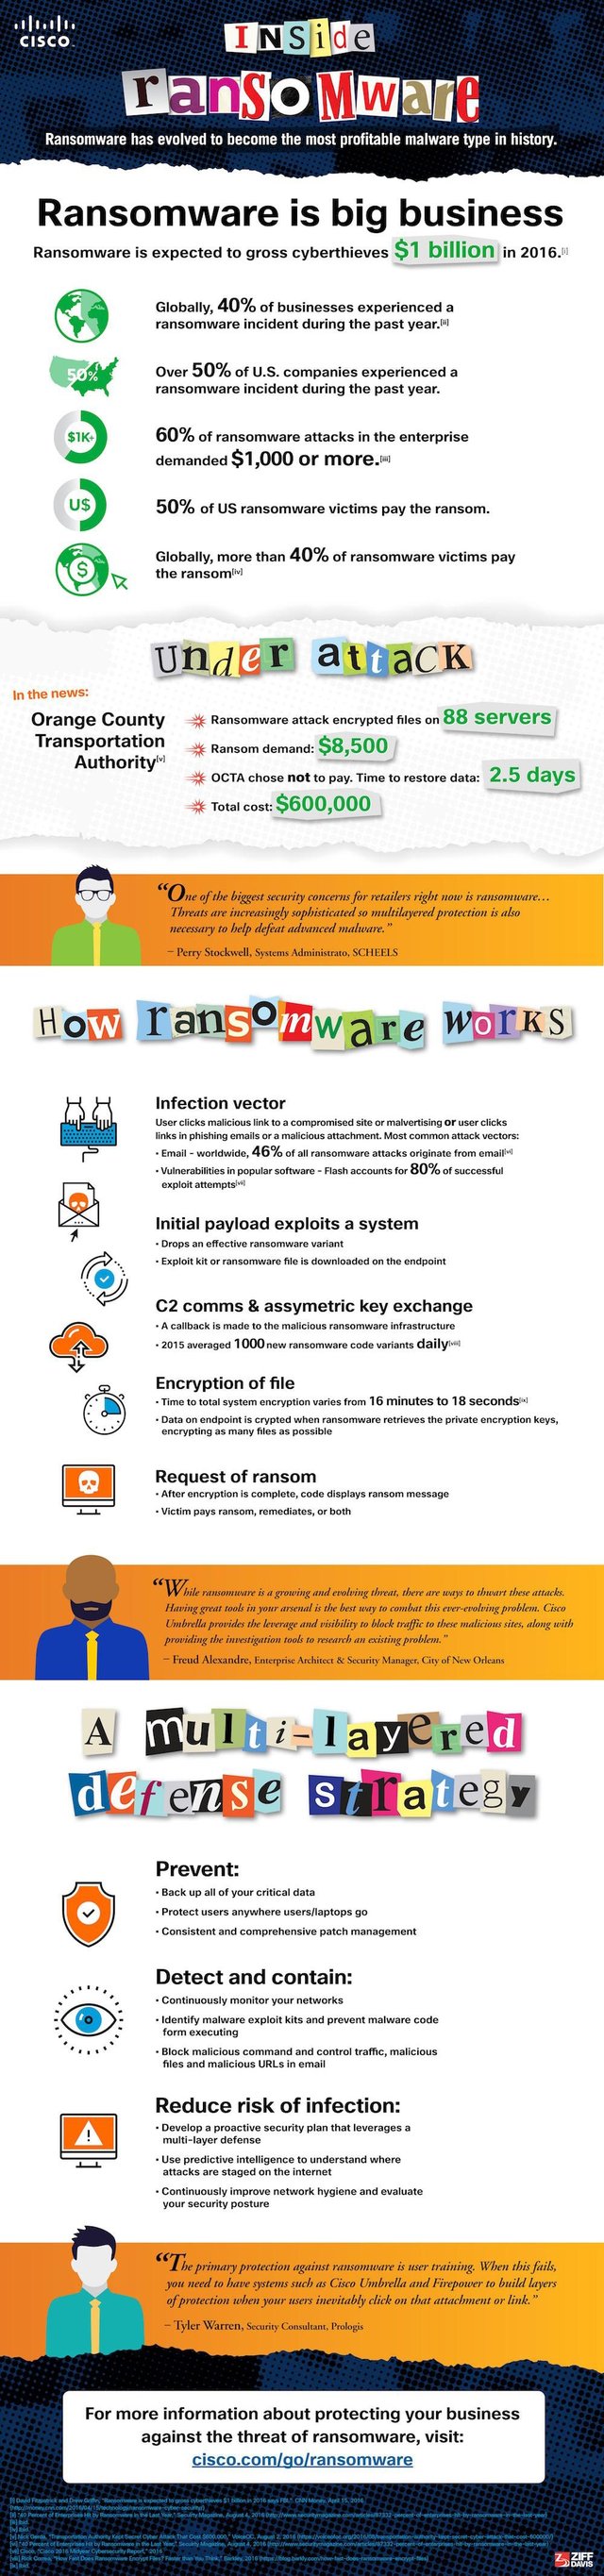 Inside Ransomware Infographic